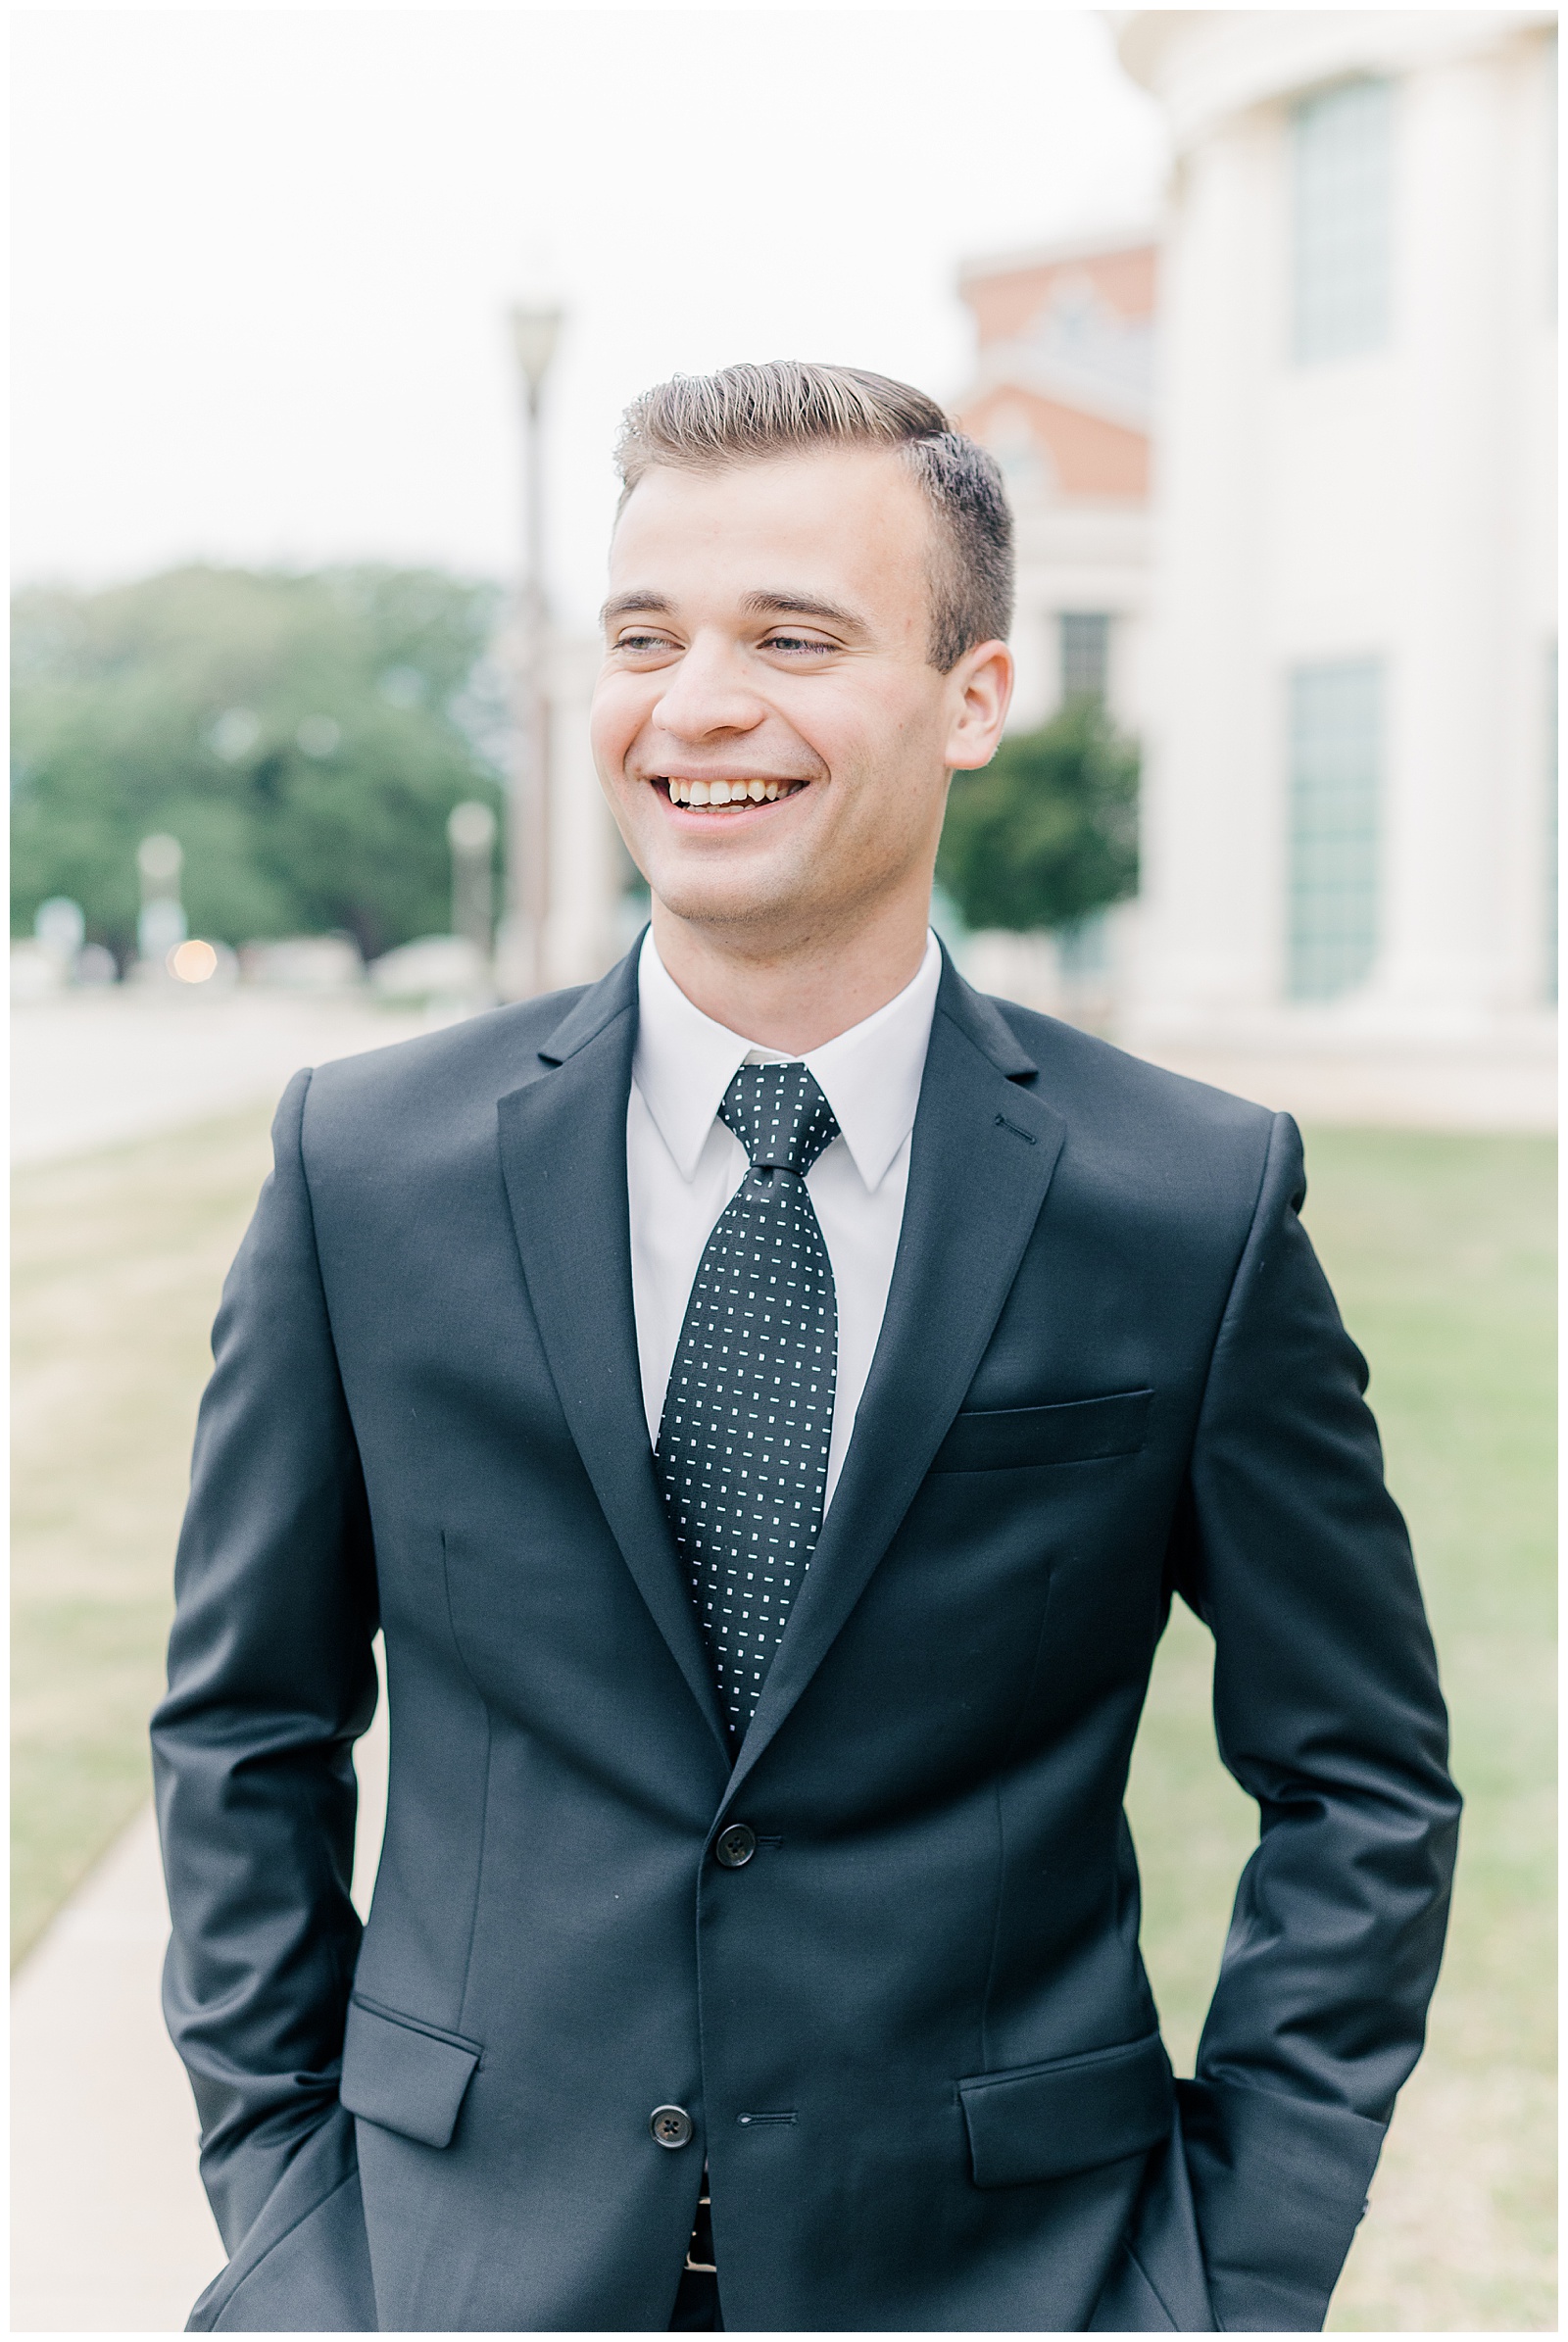 Groom laughing with hands in pocket